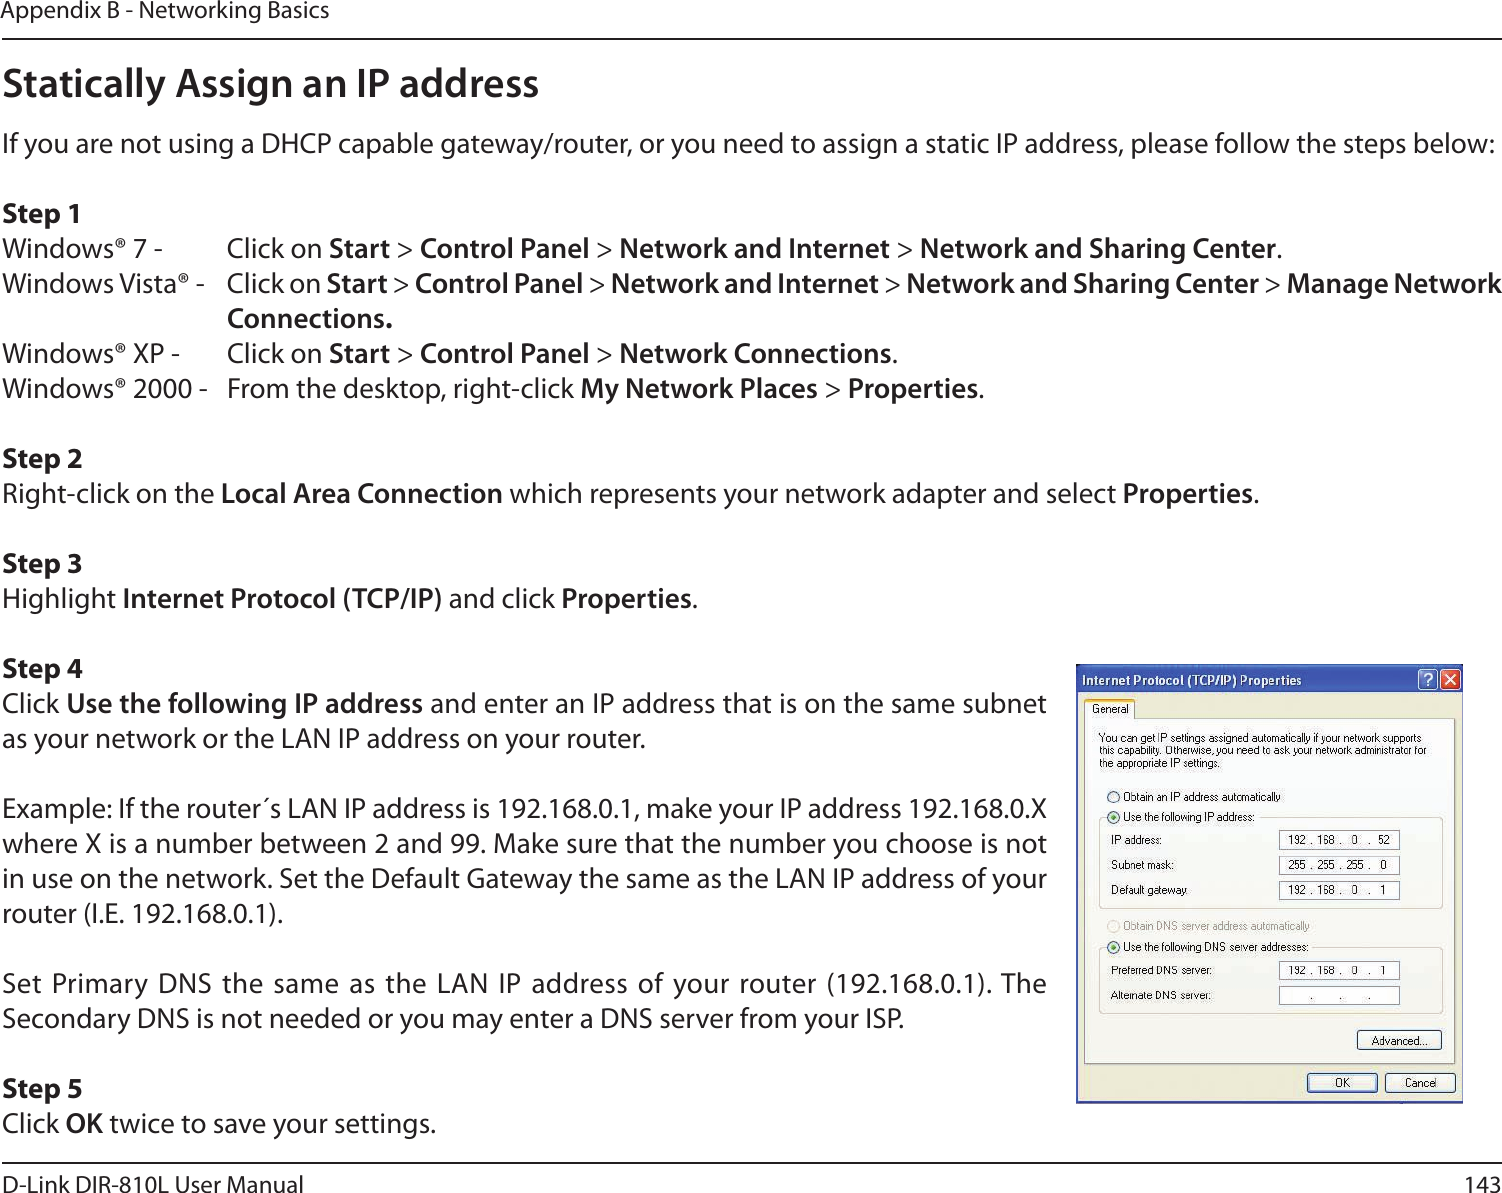 143D-Link DIR-810L User ManualAppendix B - Networking BasicsStatically Assign an IP addressIf you are not using a DHCP capable gateway/router, or you need to assign a static IP address, please follow the steps below:Step 1Windows® 7 -  Click on Start &gt; Control Panel &gt; Network and Internet &gt; Network and Sharing Center.Windows Vista® -  Click on Start &gt; Control Panel &gt; Network and Internet &gt; Network and Sharing Center &gt; Manage Network      Connections.Windows® XP -  Click on Start &gt; Control Panel &gt; Network Connections.Windows® 2000 -  From the desktop, right-click My Network Places &gt; Properties.Step 2Right-click on the Local Area Connection which represents your network adapter and select Properties.Step 3Highlight Internet Protocol (TCP/IP) and click Properties.Step 4Click Use the following IP address and enter an IP address that is on the same subnet as your network or the LAN IP address on your router. Example: If the router´s LAN IP address is 192.168.0.1, make your IP address 192.168.0.X where X is a number between 2 and 99. Make sure that the number you choose is not in use on the network. Set the Default Gateway the same as the LAN IP address of your router (I.E. 192.168.0.1). Set Primary DNS  the same  as the  LAN IP  address of your router (192.168.0.1). The Secondary DNS is not needed or you may enter a DNS server from your ISP.Step 5Click OK twice to save your settings.